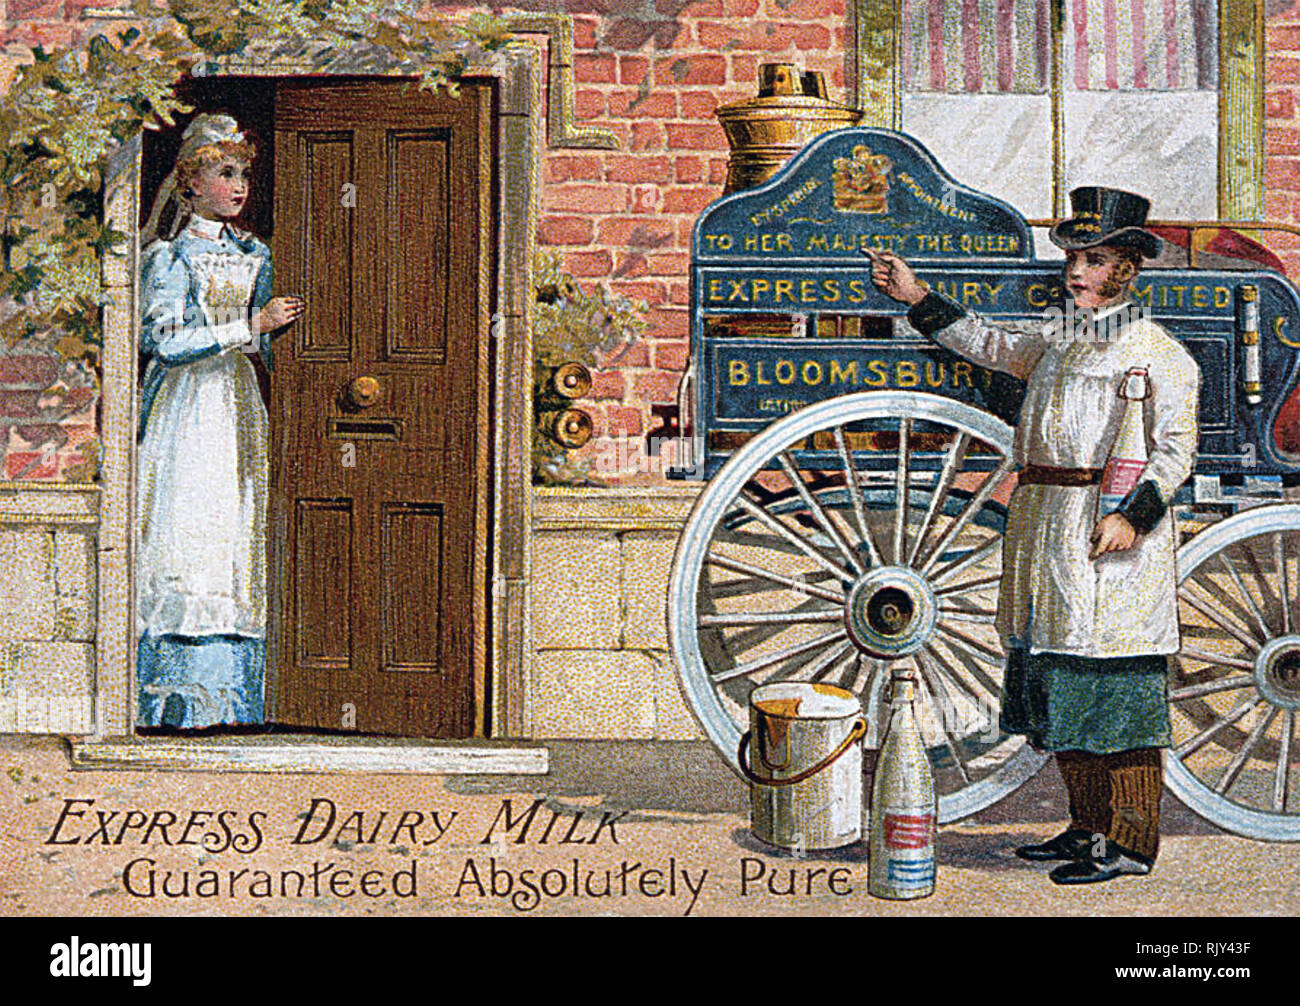 EXPRESS DAIRY MILK DELIVERY CART advert about 1895 Stock Photo